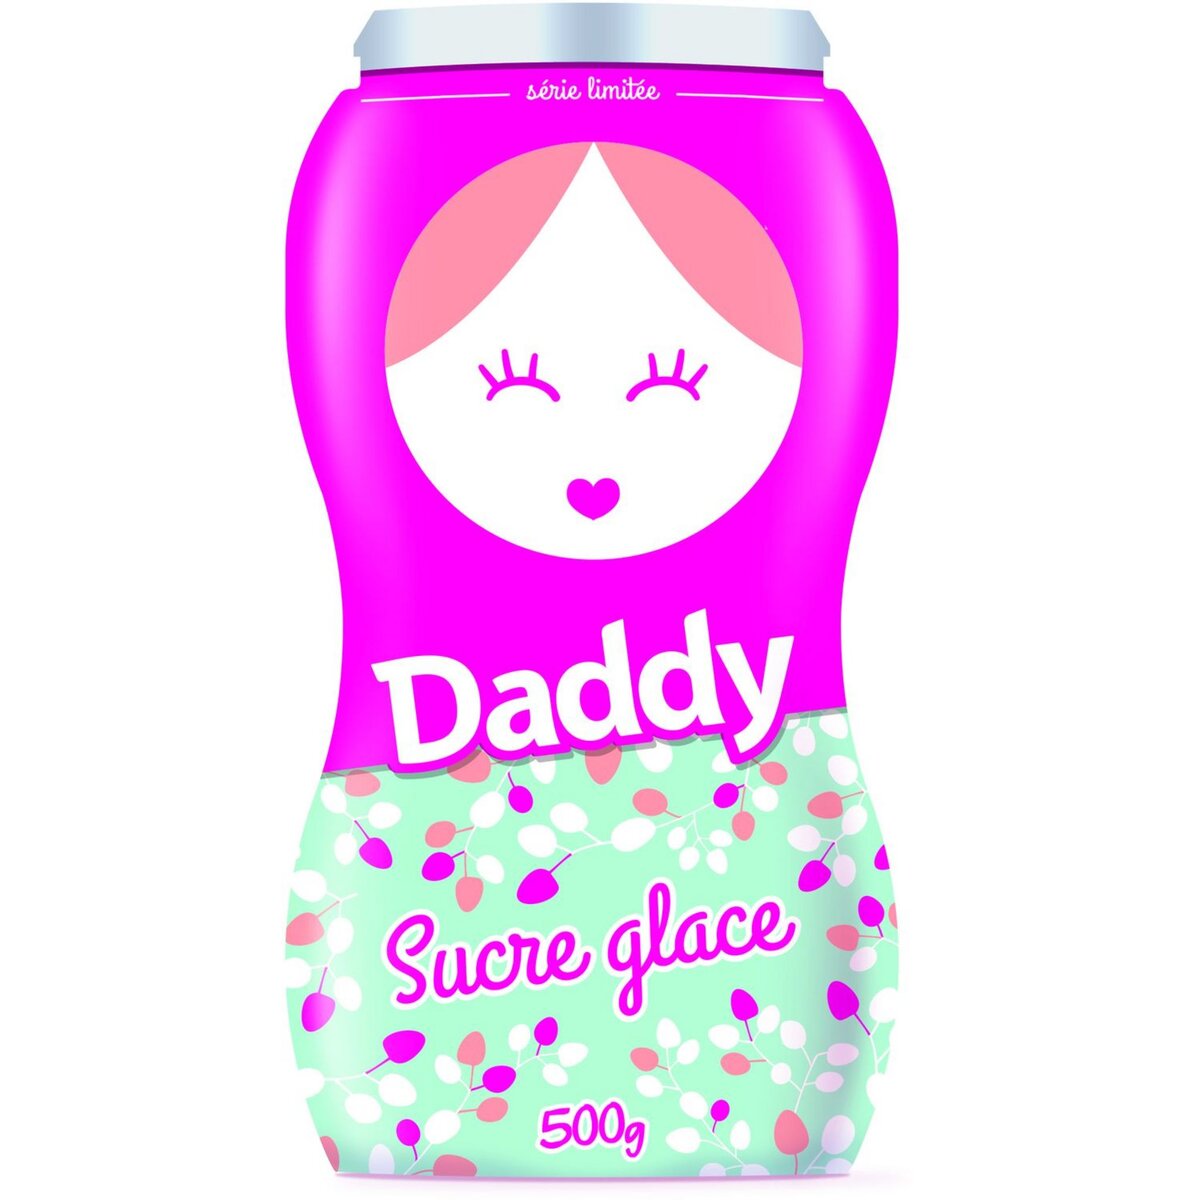 Sucre glace - Daddy - 500 g